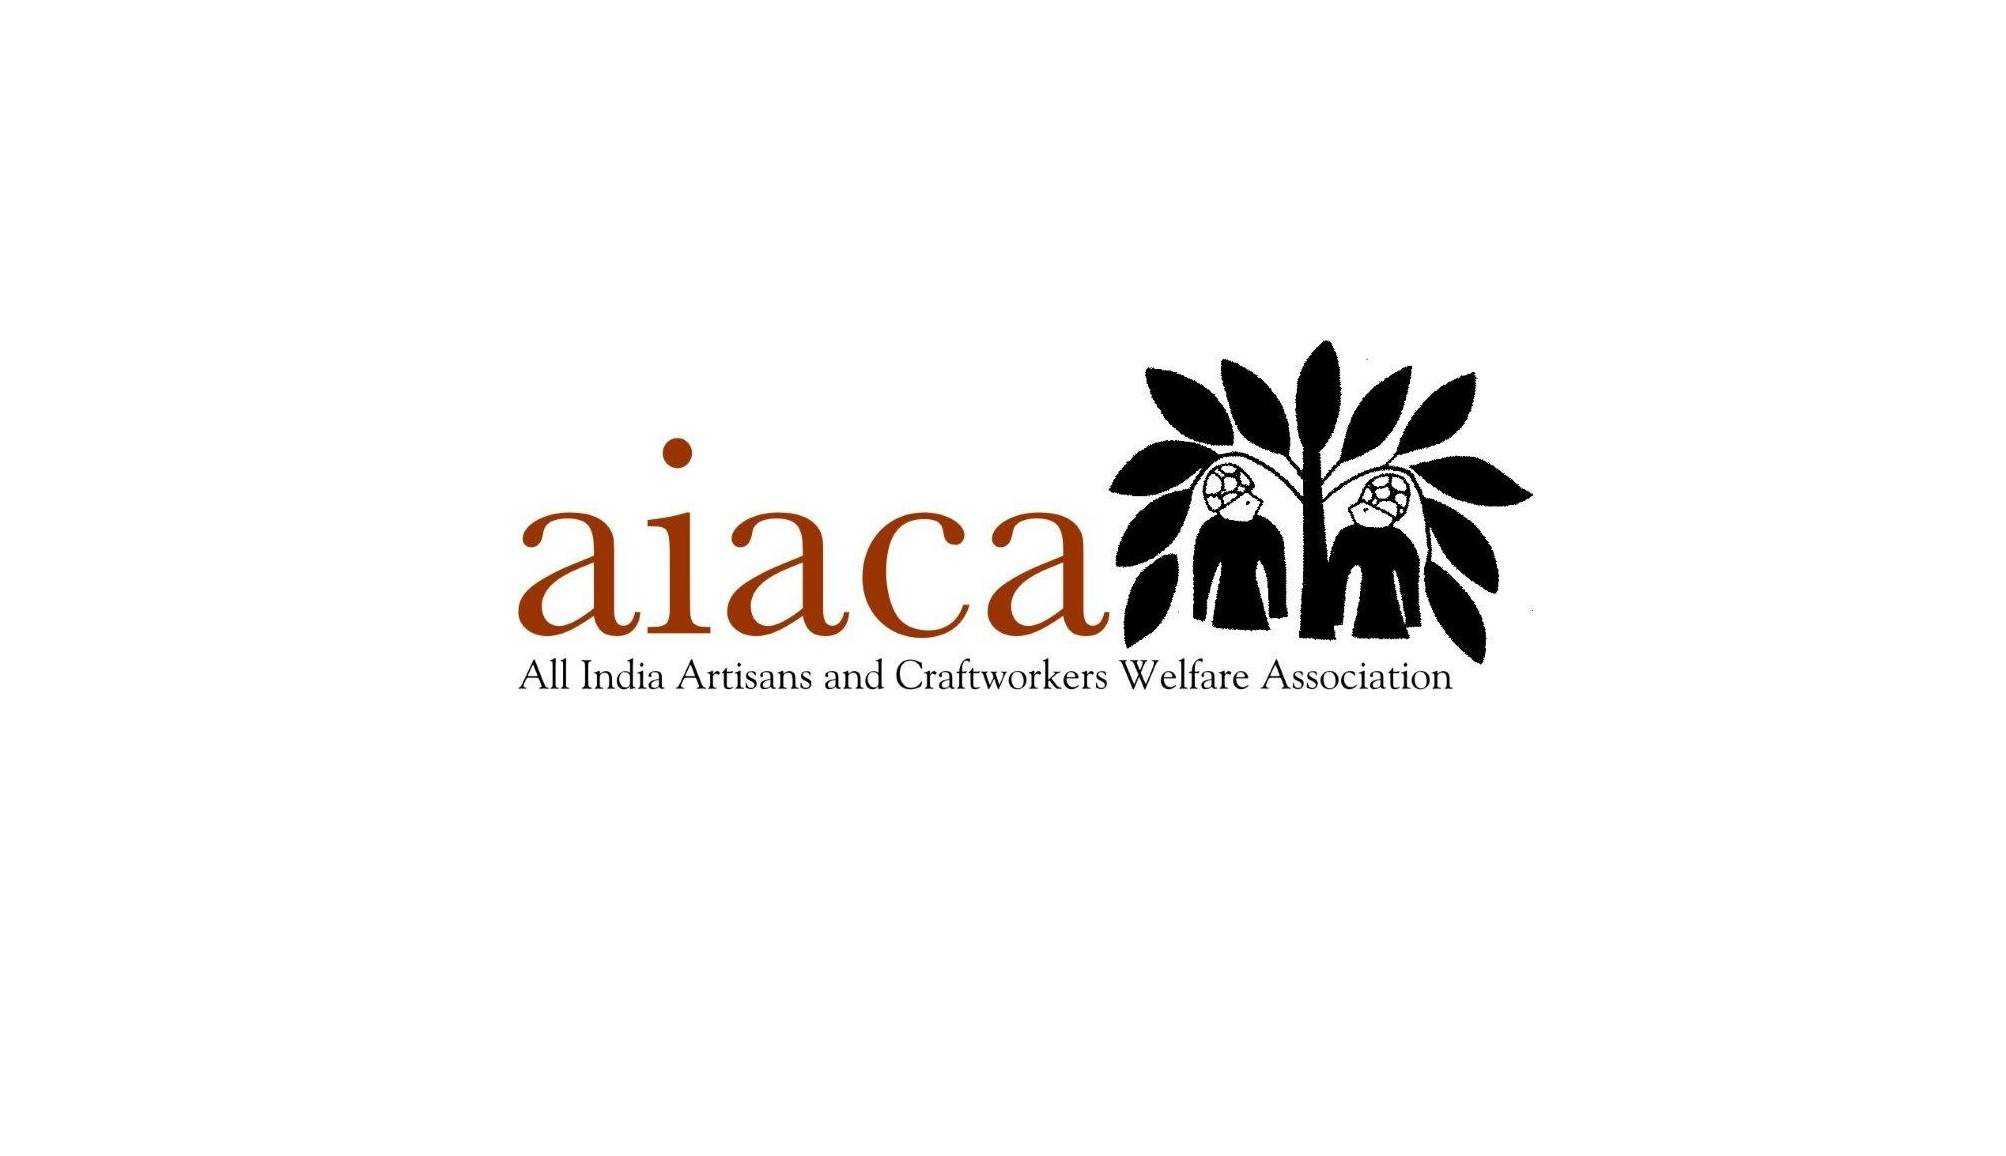 All India Artisans and Craftworkers Welfare Association (AIACA)